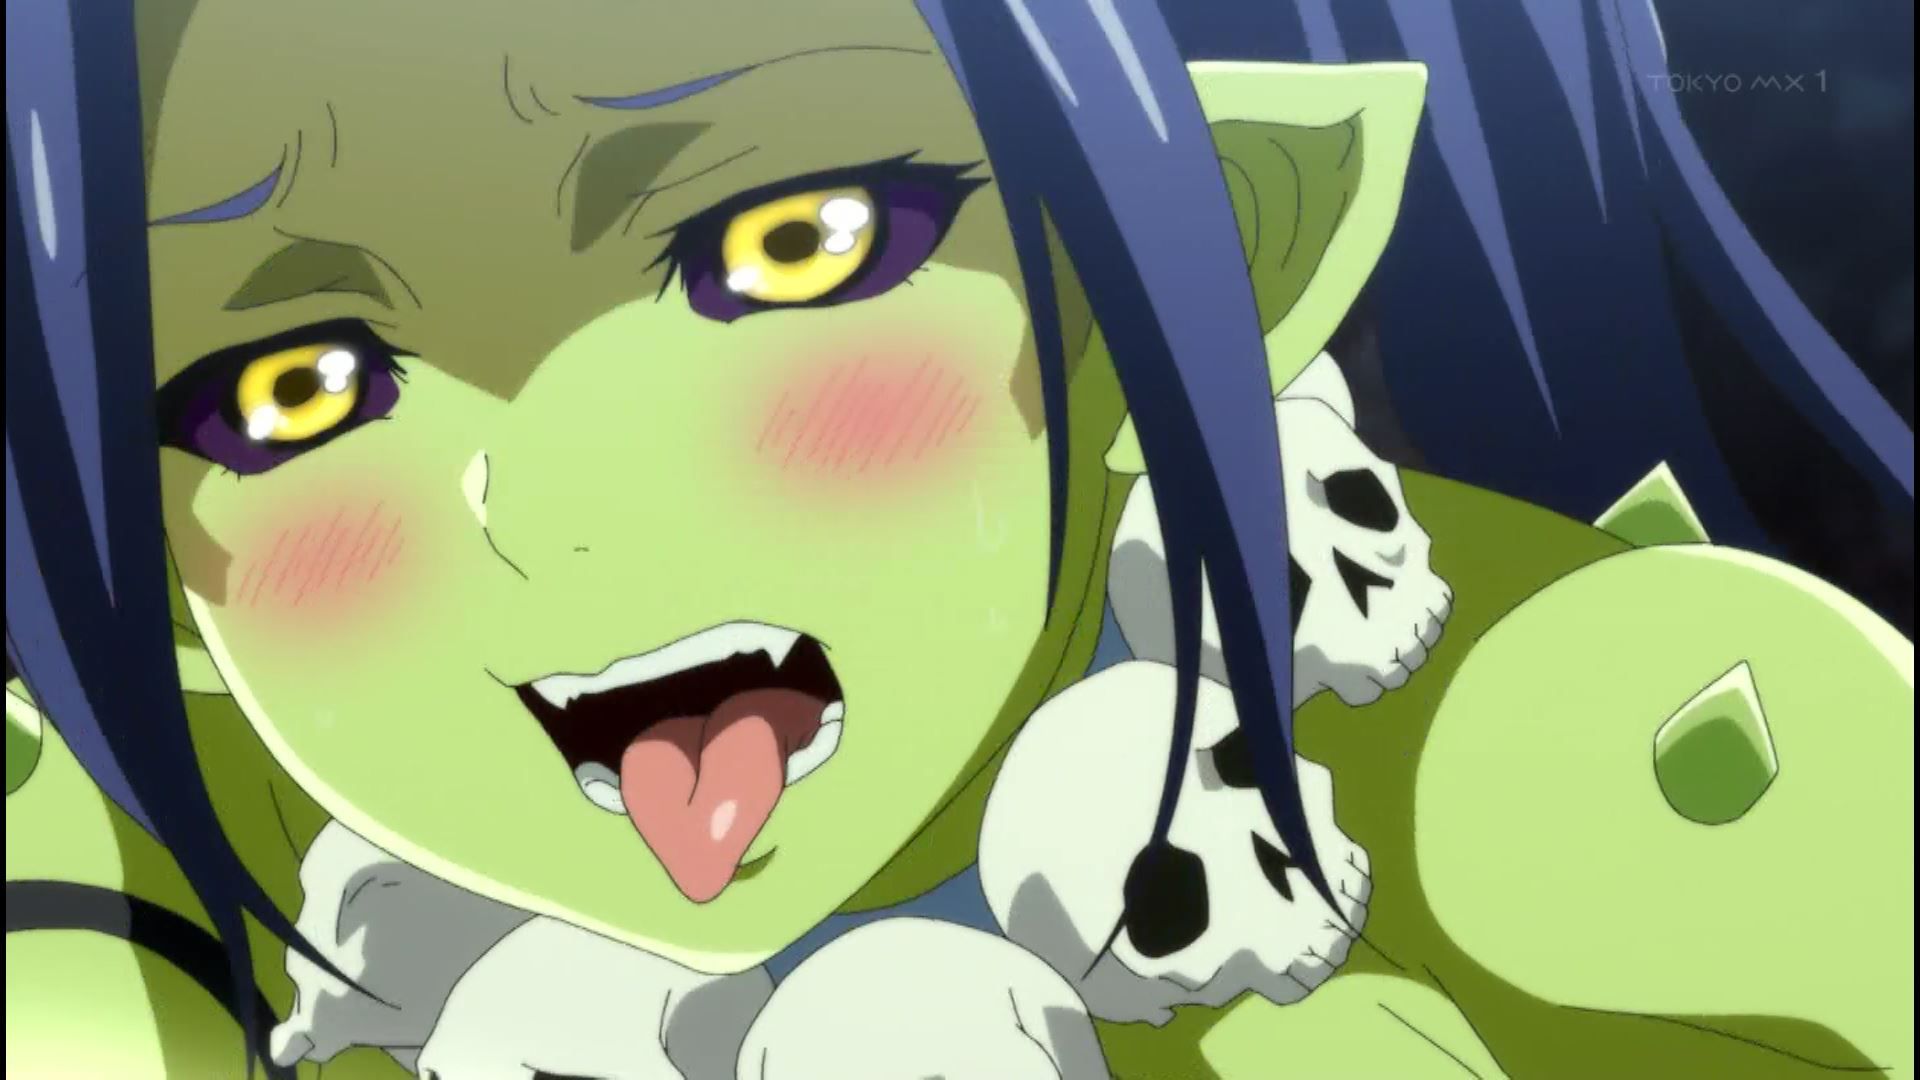 The goblin girl and ecchi scene that got estrus in episode 2 of the second season of the anime "Peter Grill and the Time of the Wise"! 8